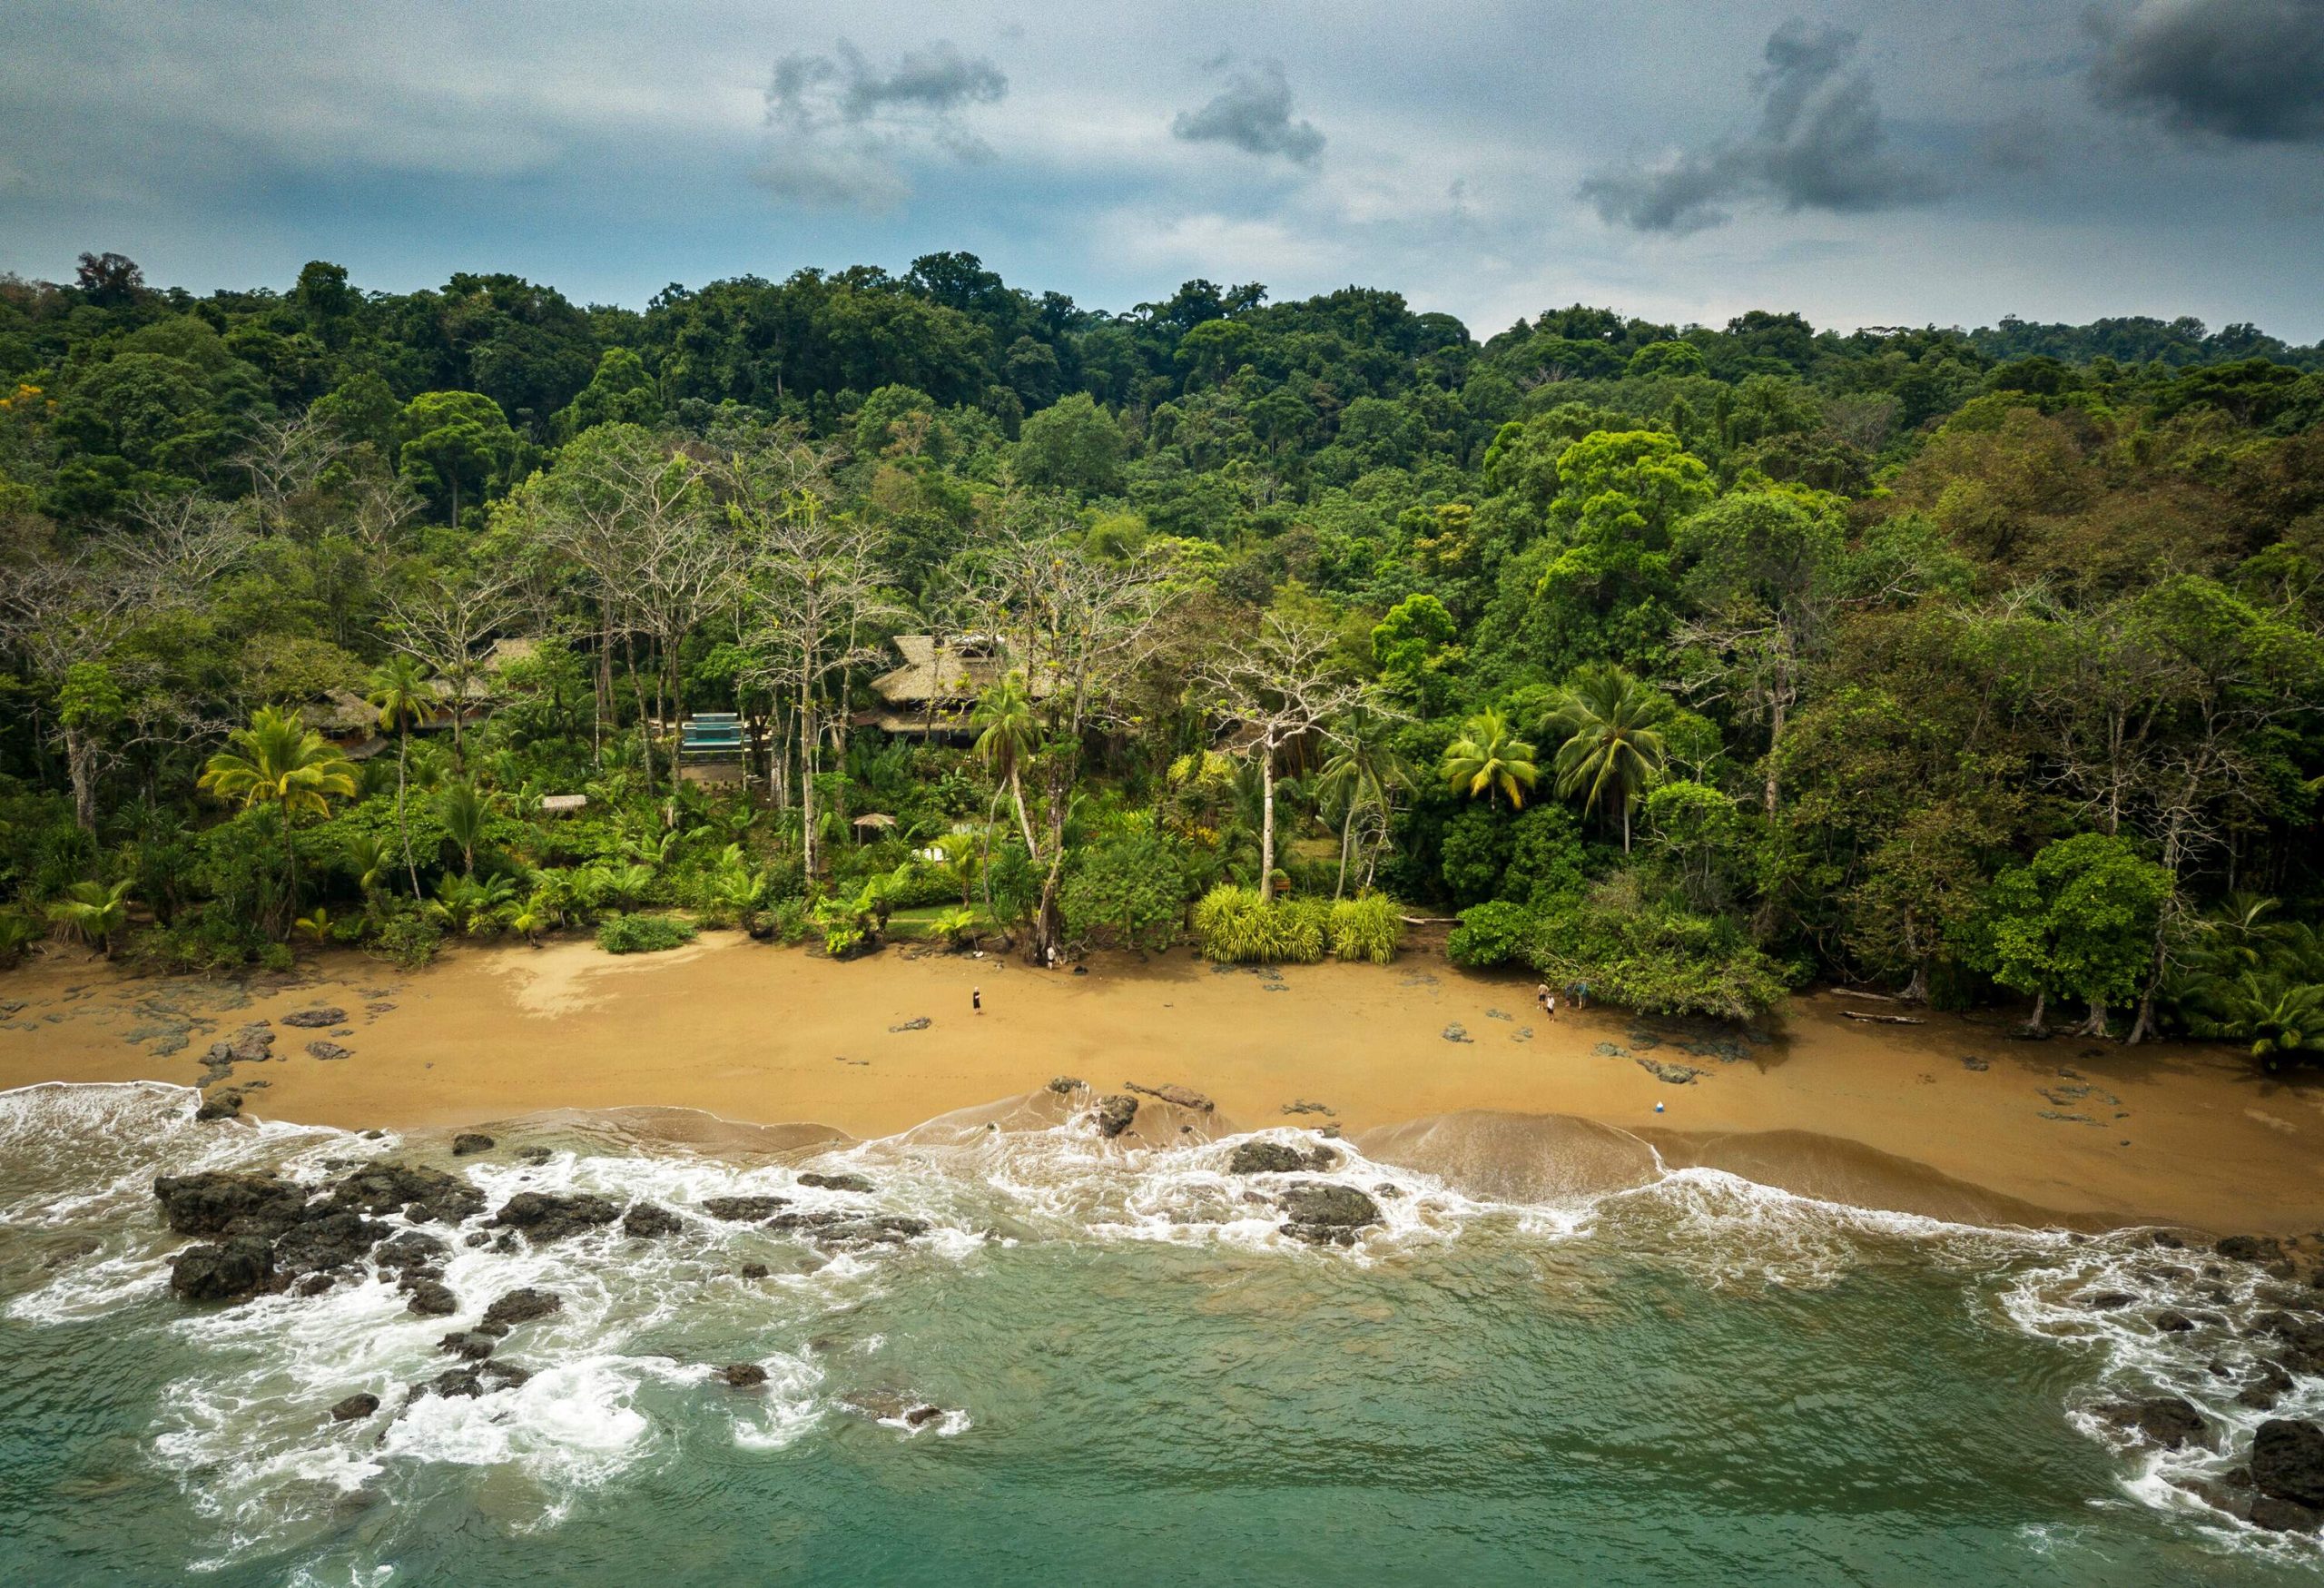 Beach houses hide in the thick, lush green trees surrounding the white waves rolling into the rock on the golden sands.